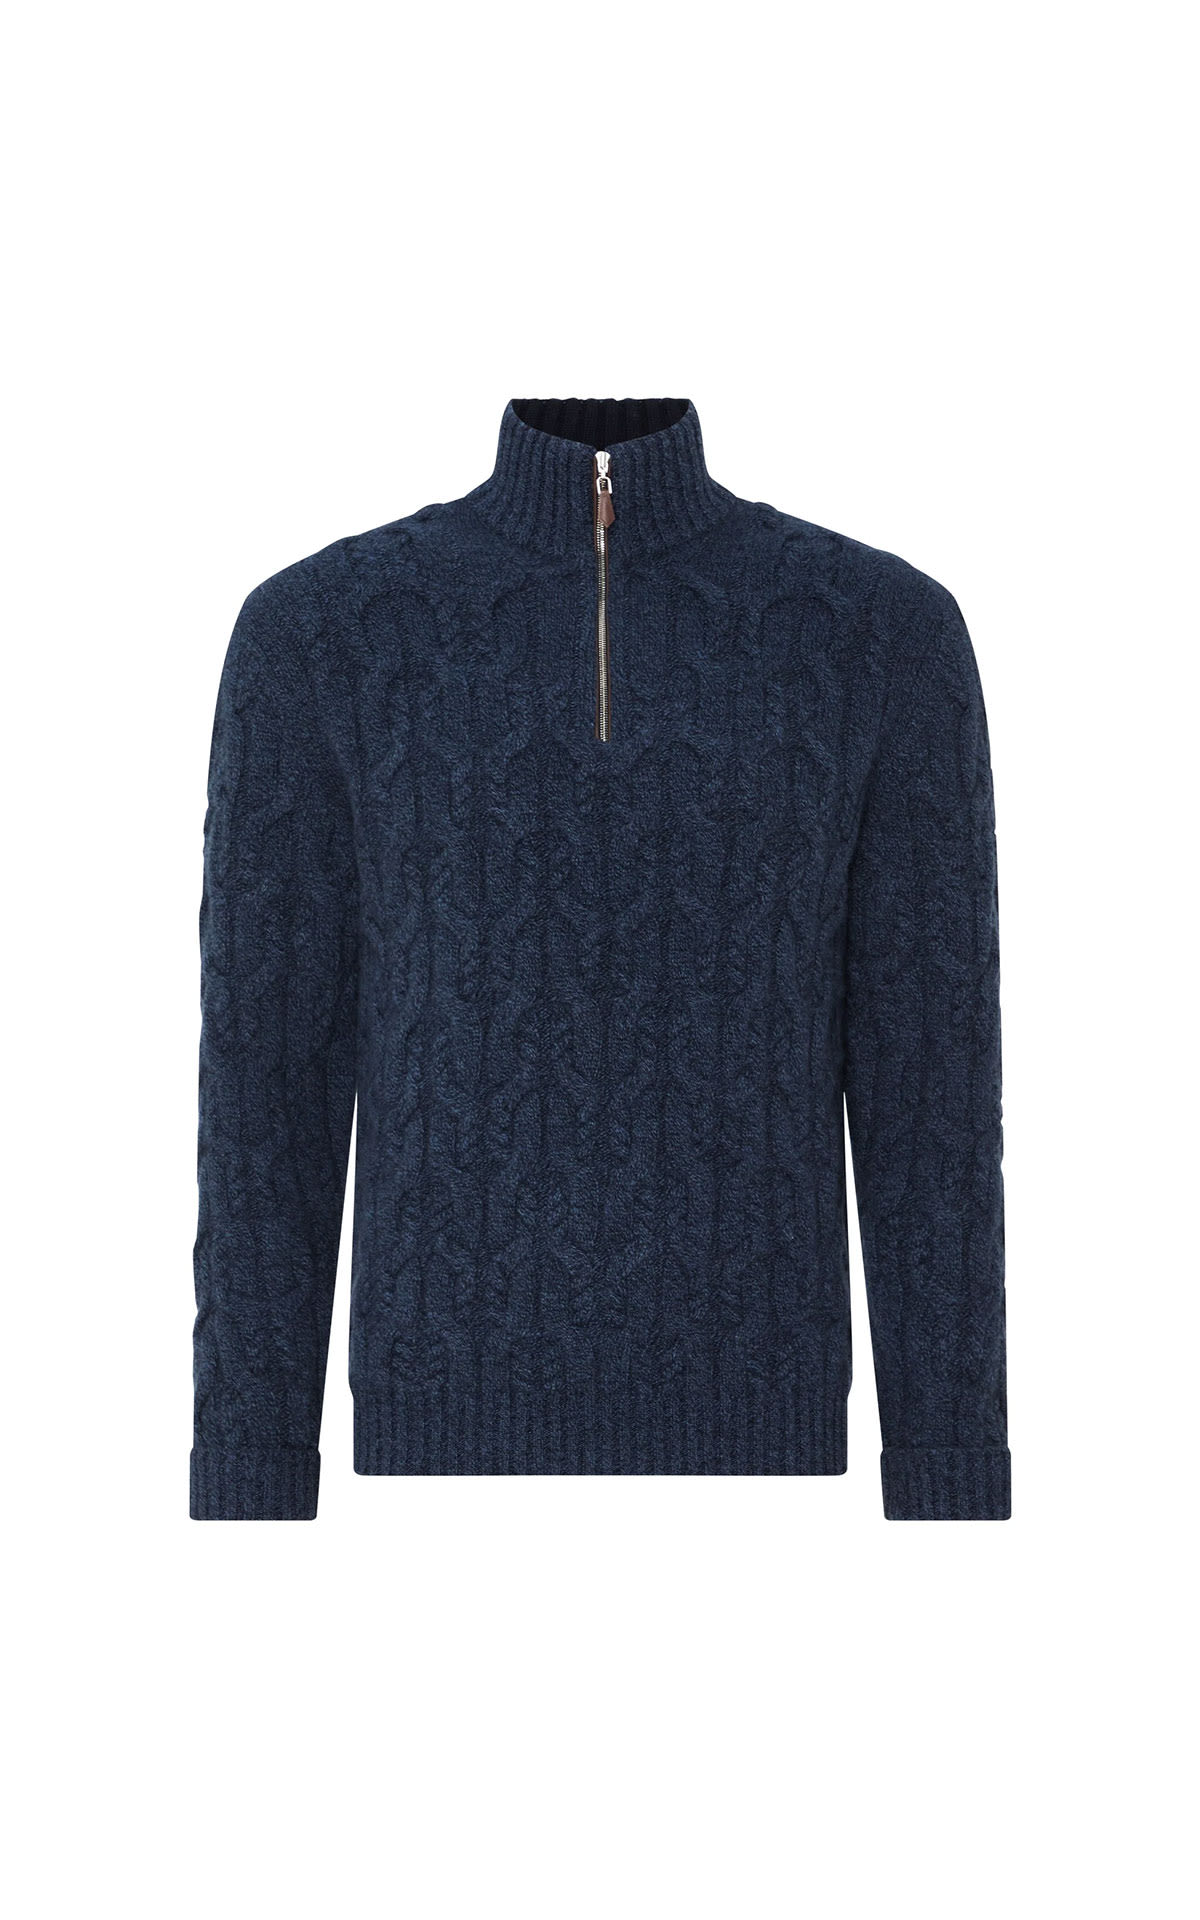 N. Peal Textured cable half zip cashmere jumper hurricane blue from Bicester Village